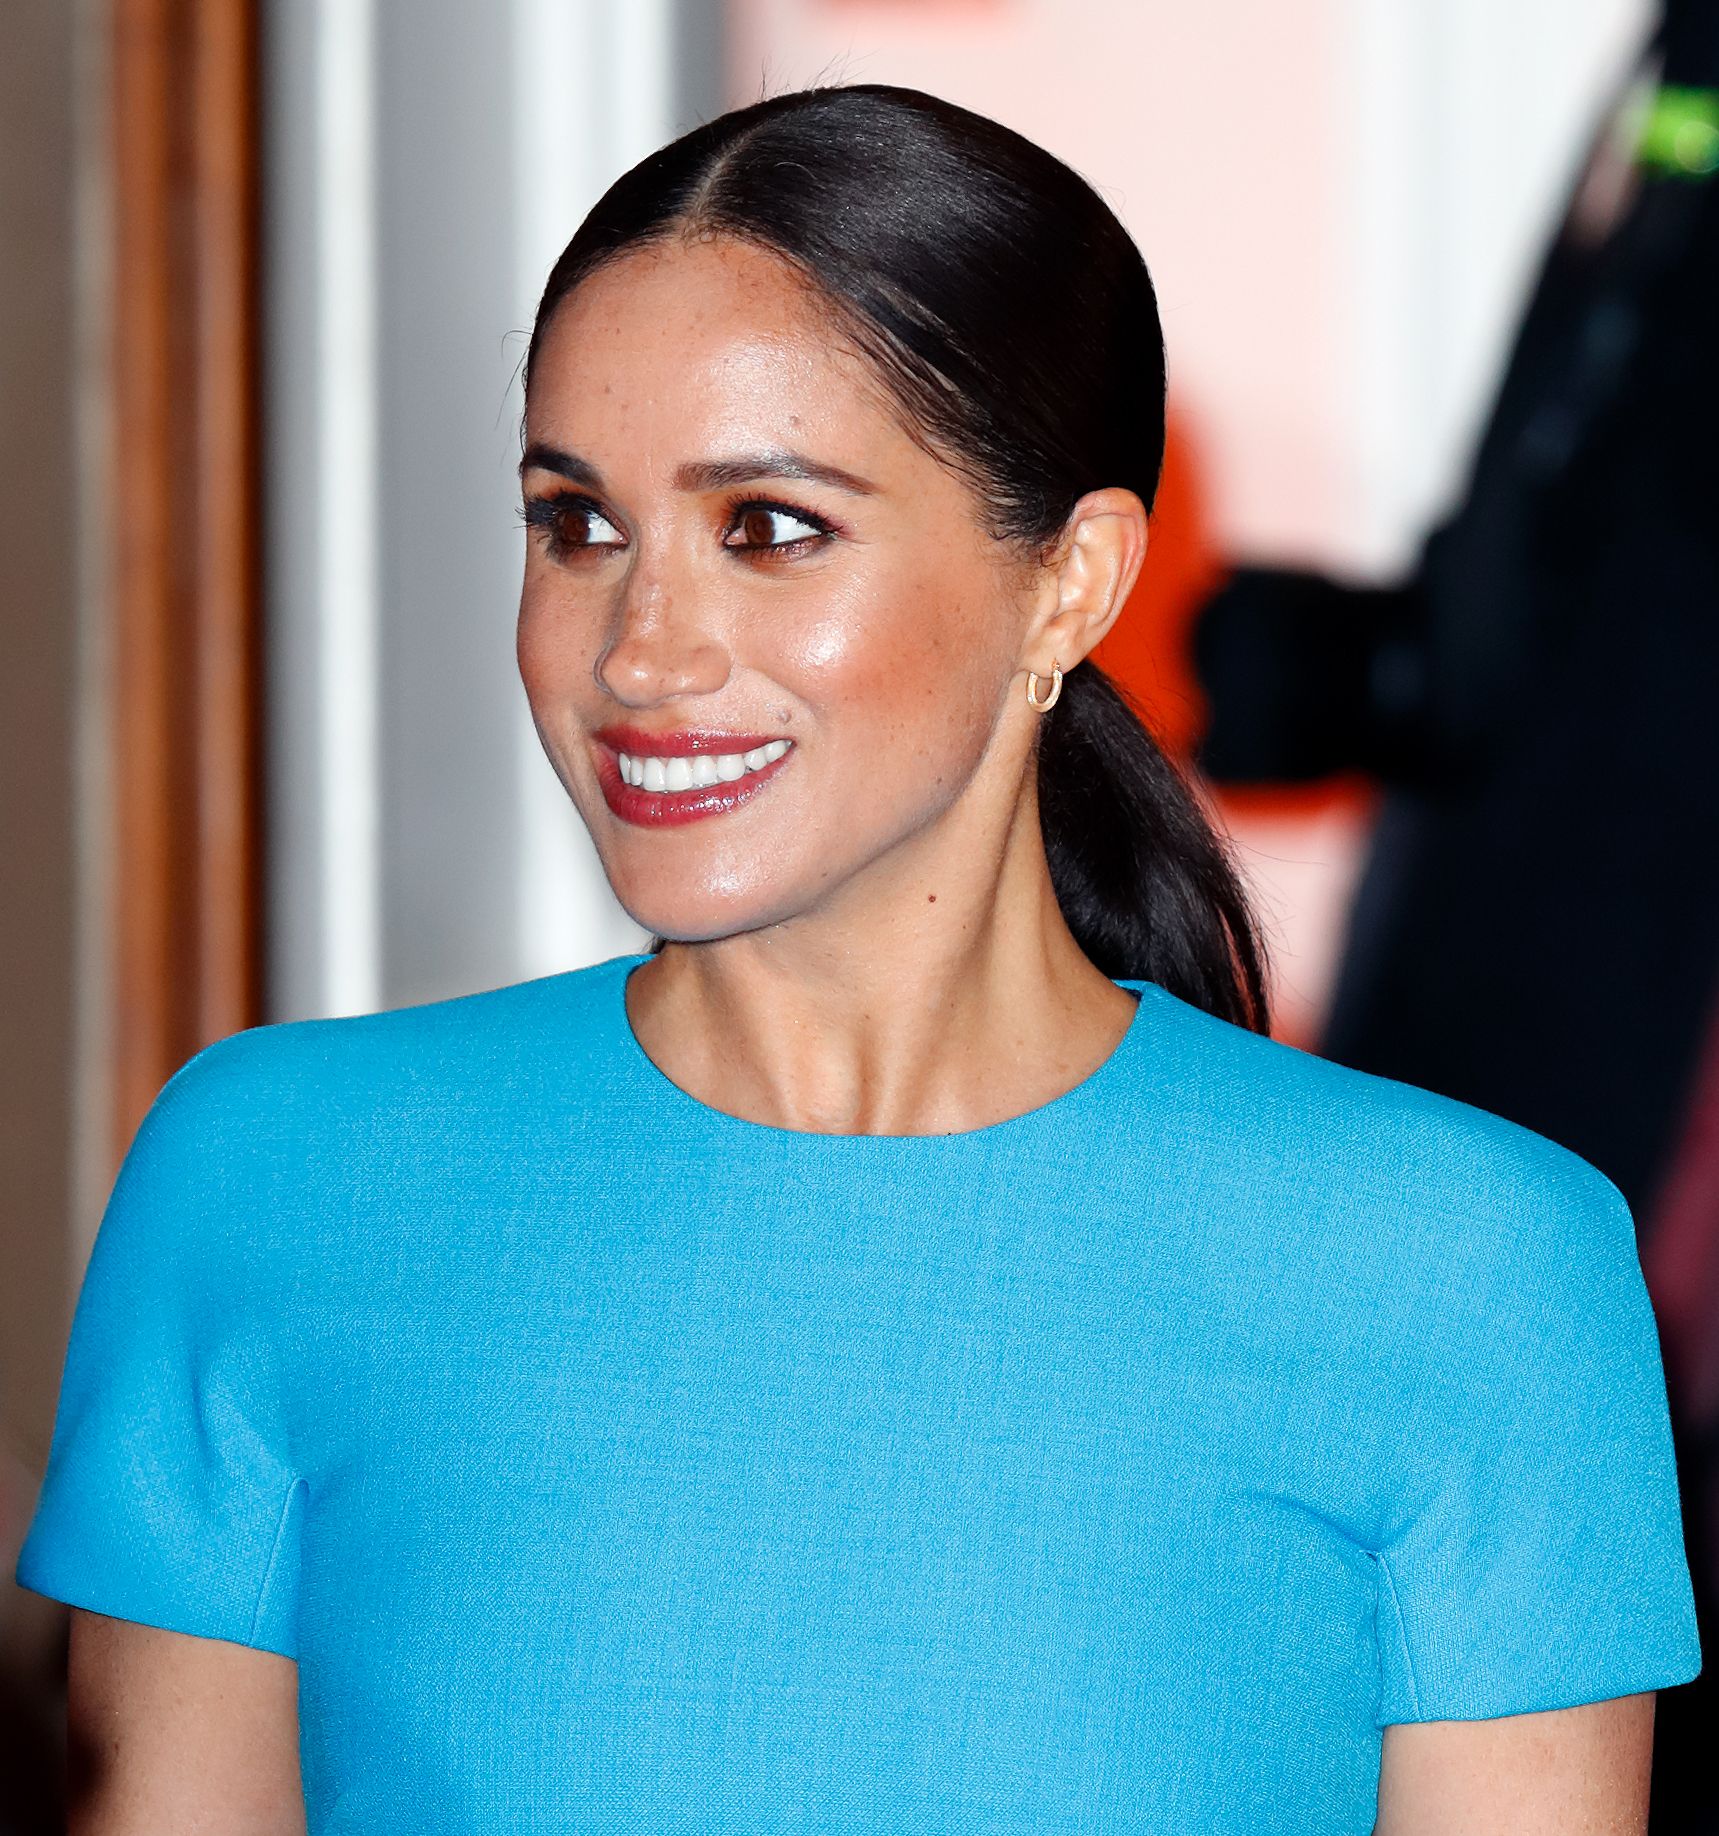 Meghan Markle at the Endeavour Fund Awards at Mansion House on March 5, 2020 | Photo: Getty Images